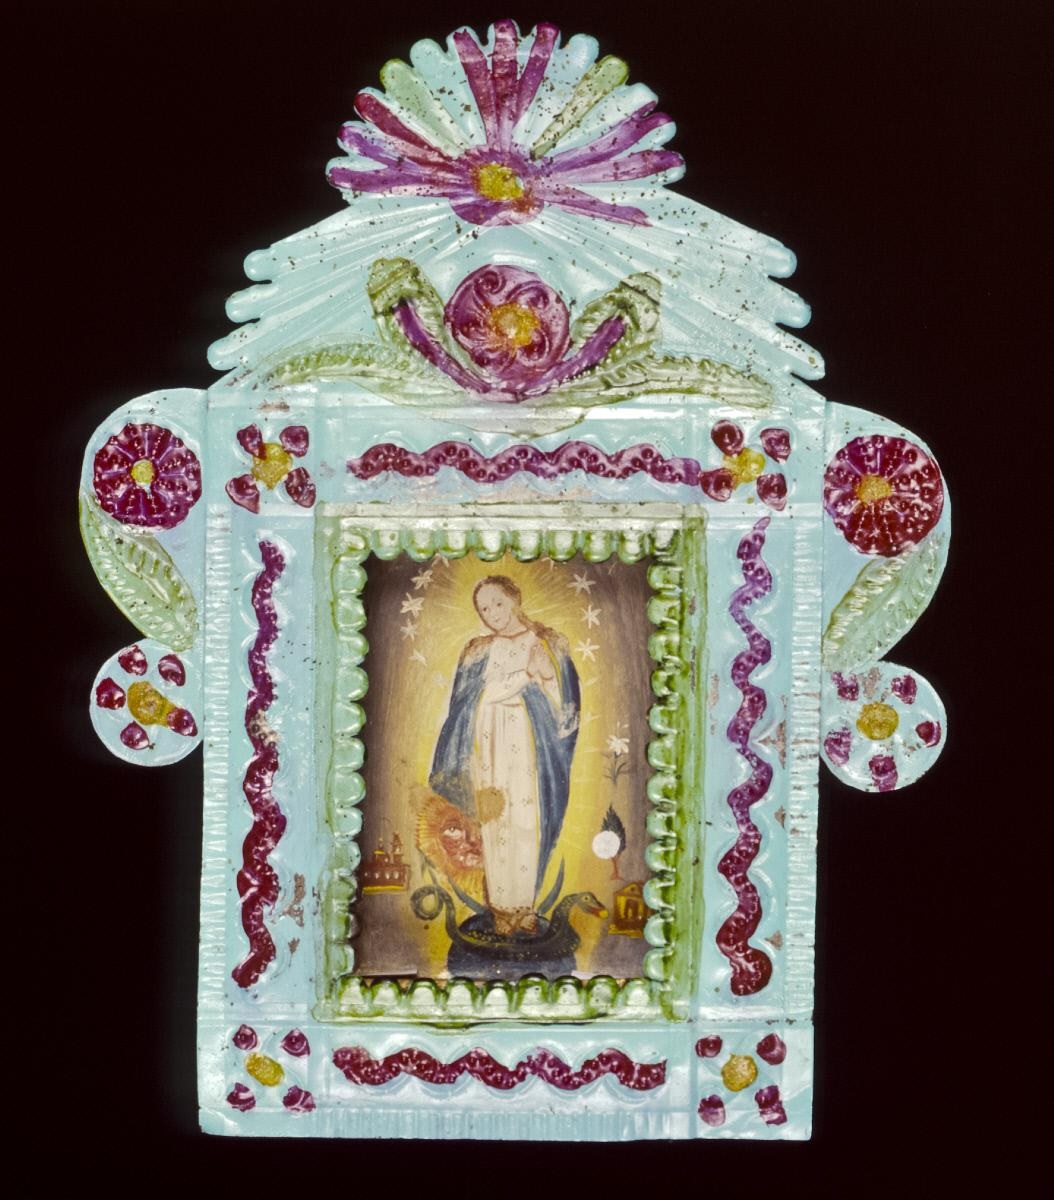 Retablo, Mexico, ca. 1850. From the Girard Foundation Collection at the Museum of International Folk Art